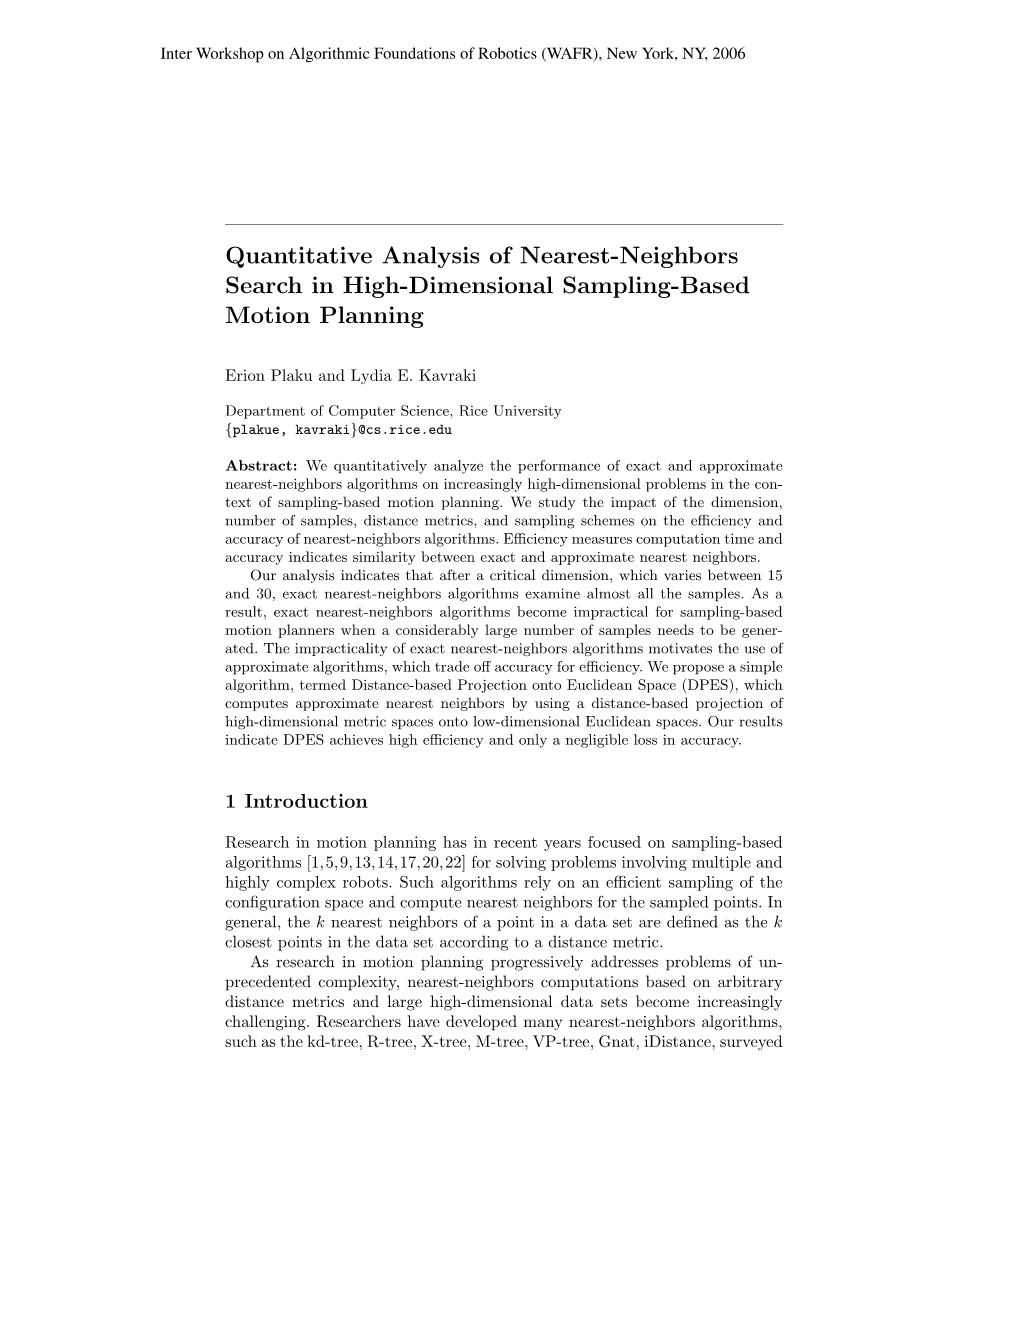 Quantitative Analysis of Nearest-Neighbors Search in High-Dimensional Sampling-Based Motion Planning